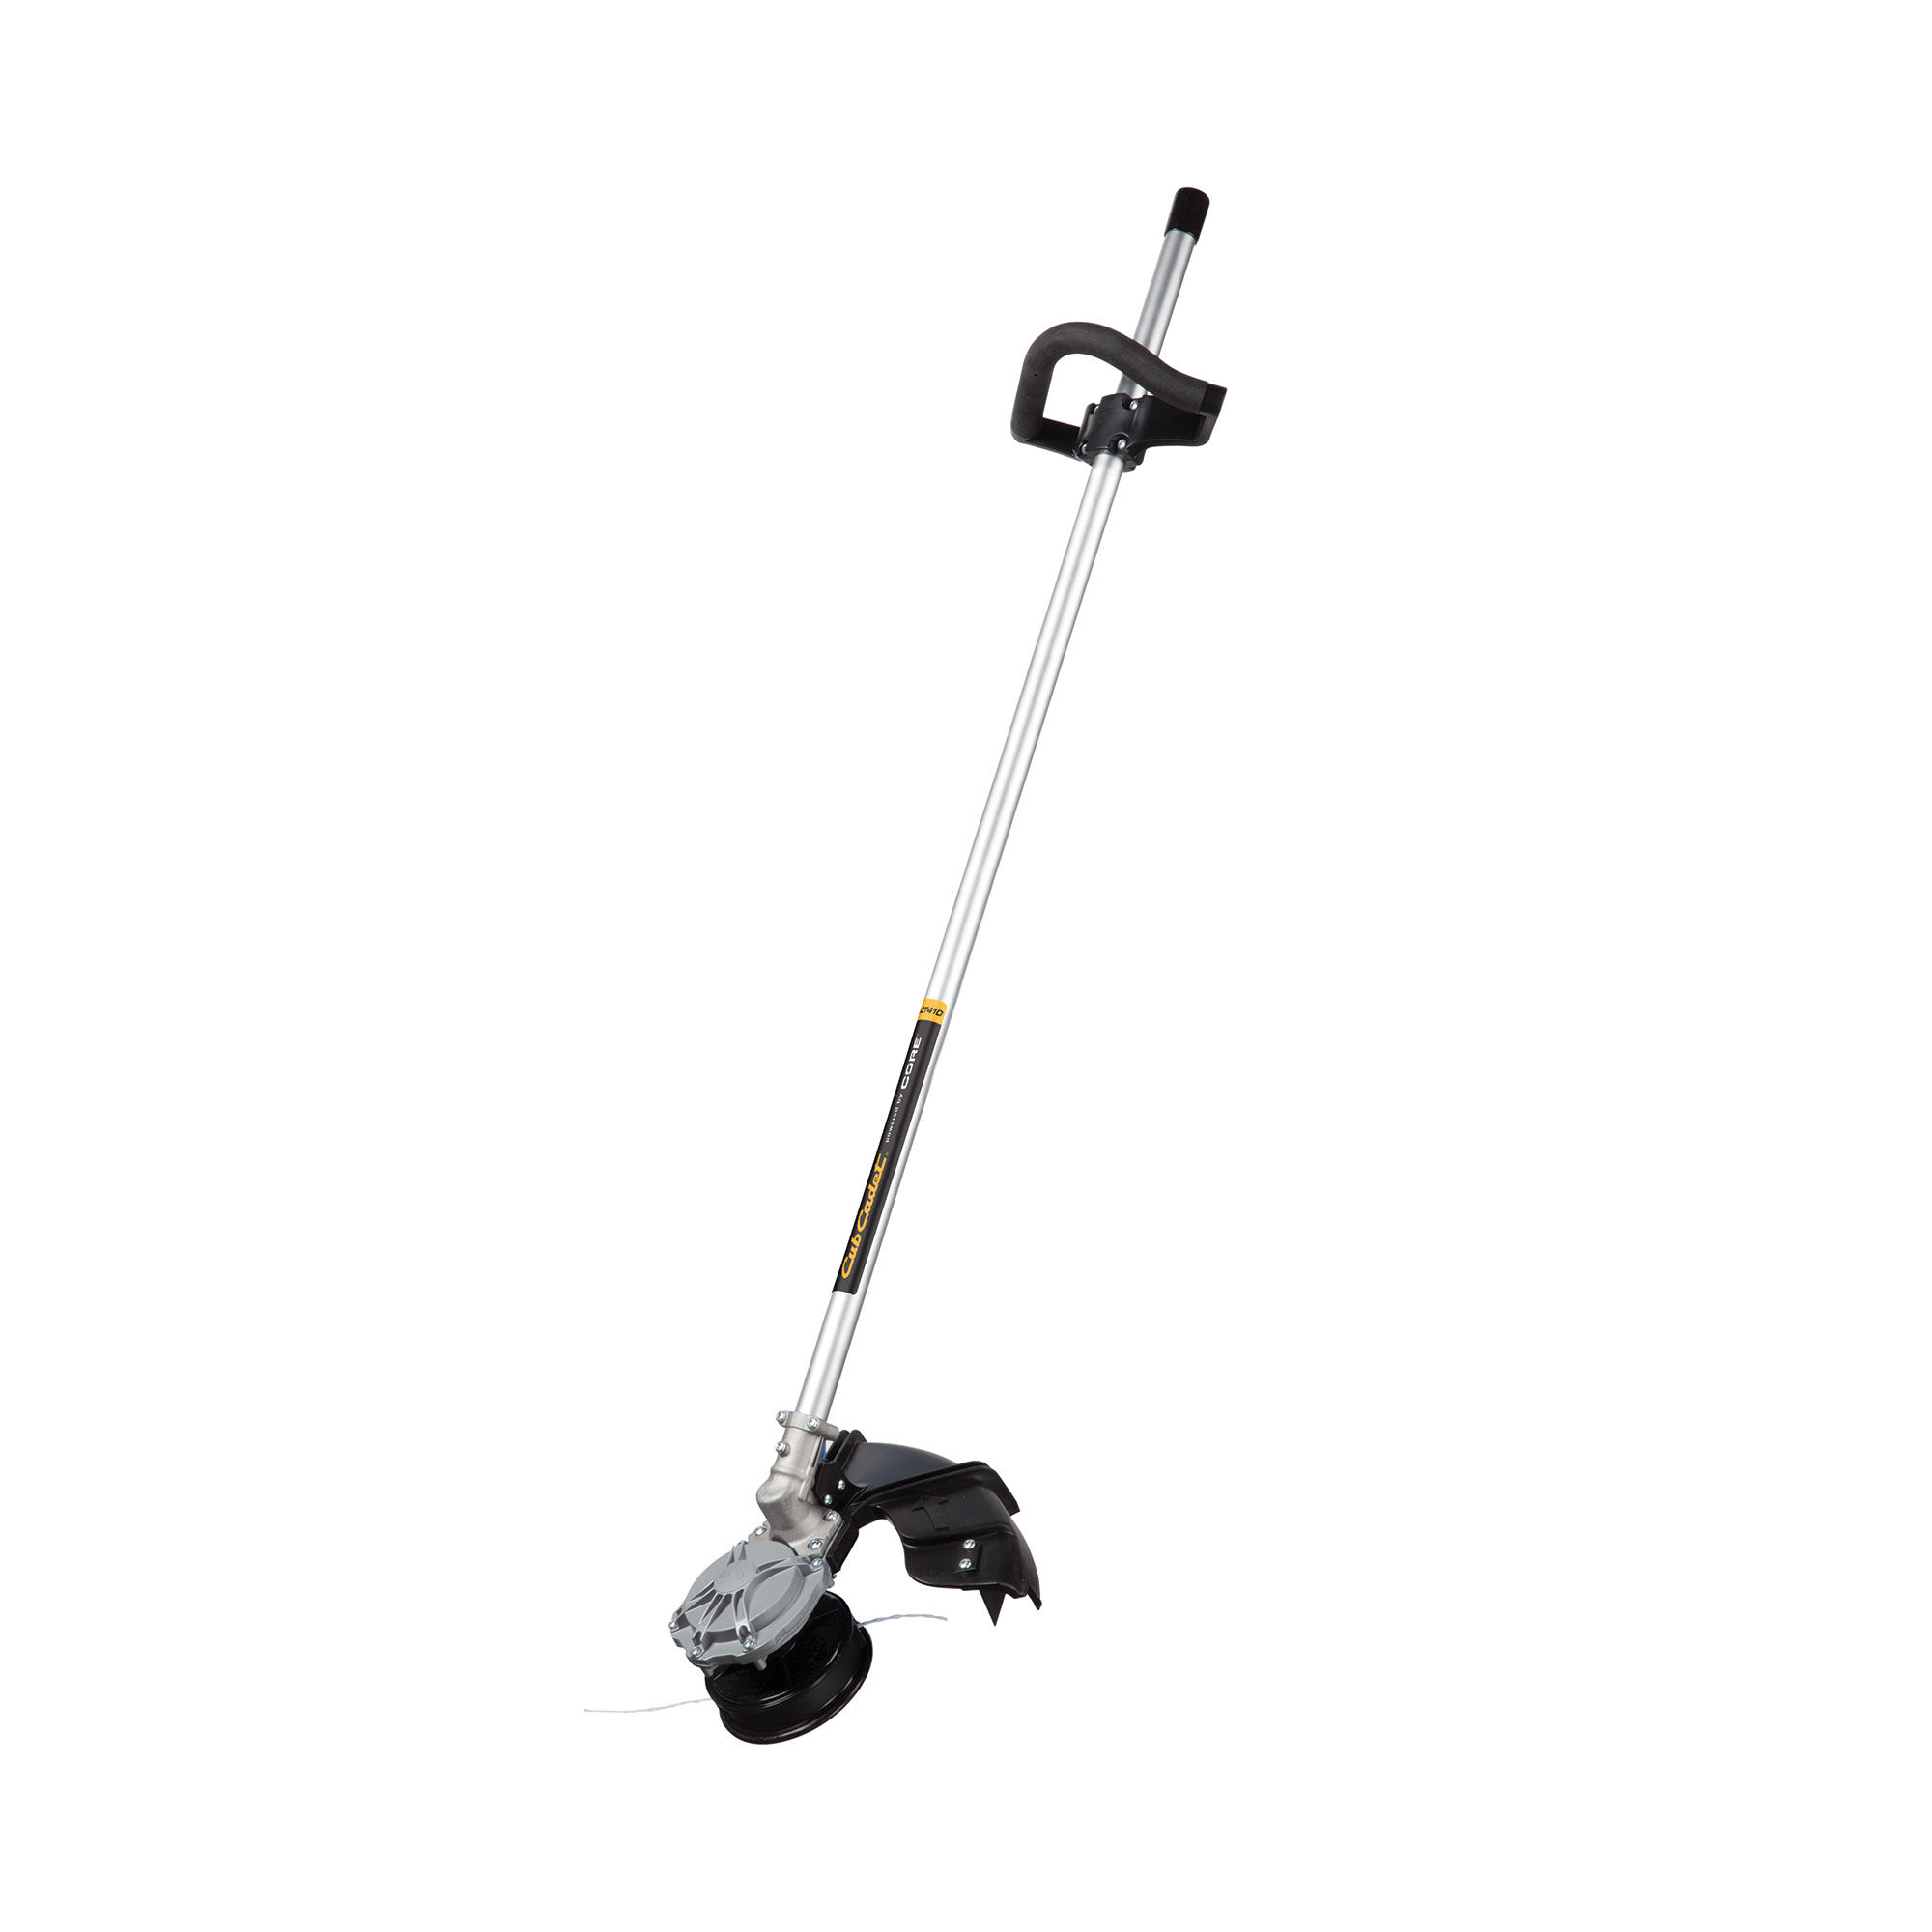 cub cadet wheeled string trimmer attachments